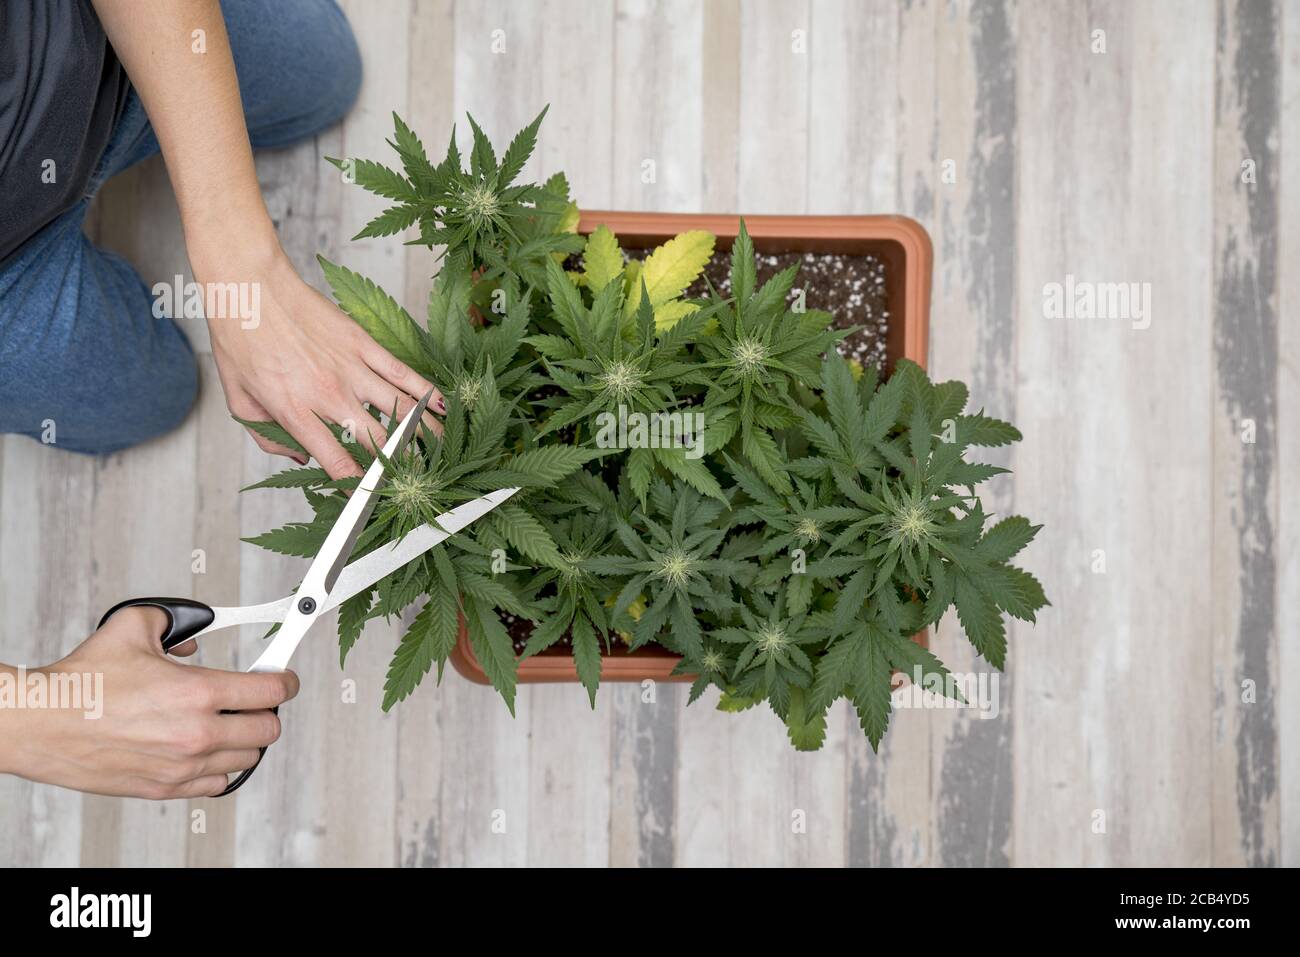 Hand cutting cannabis plants. Woman's hand engaged in pruning cannabis for therapeutic use. Medical marijuana concept background. Stock Photo